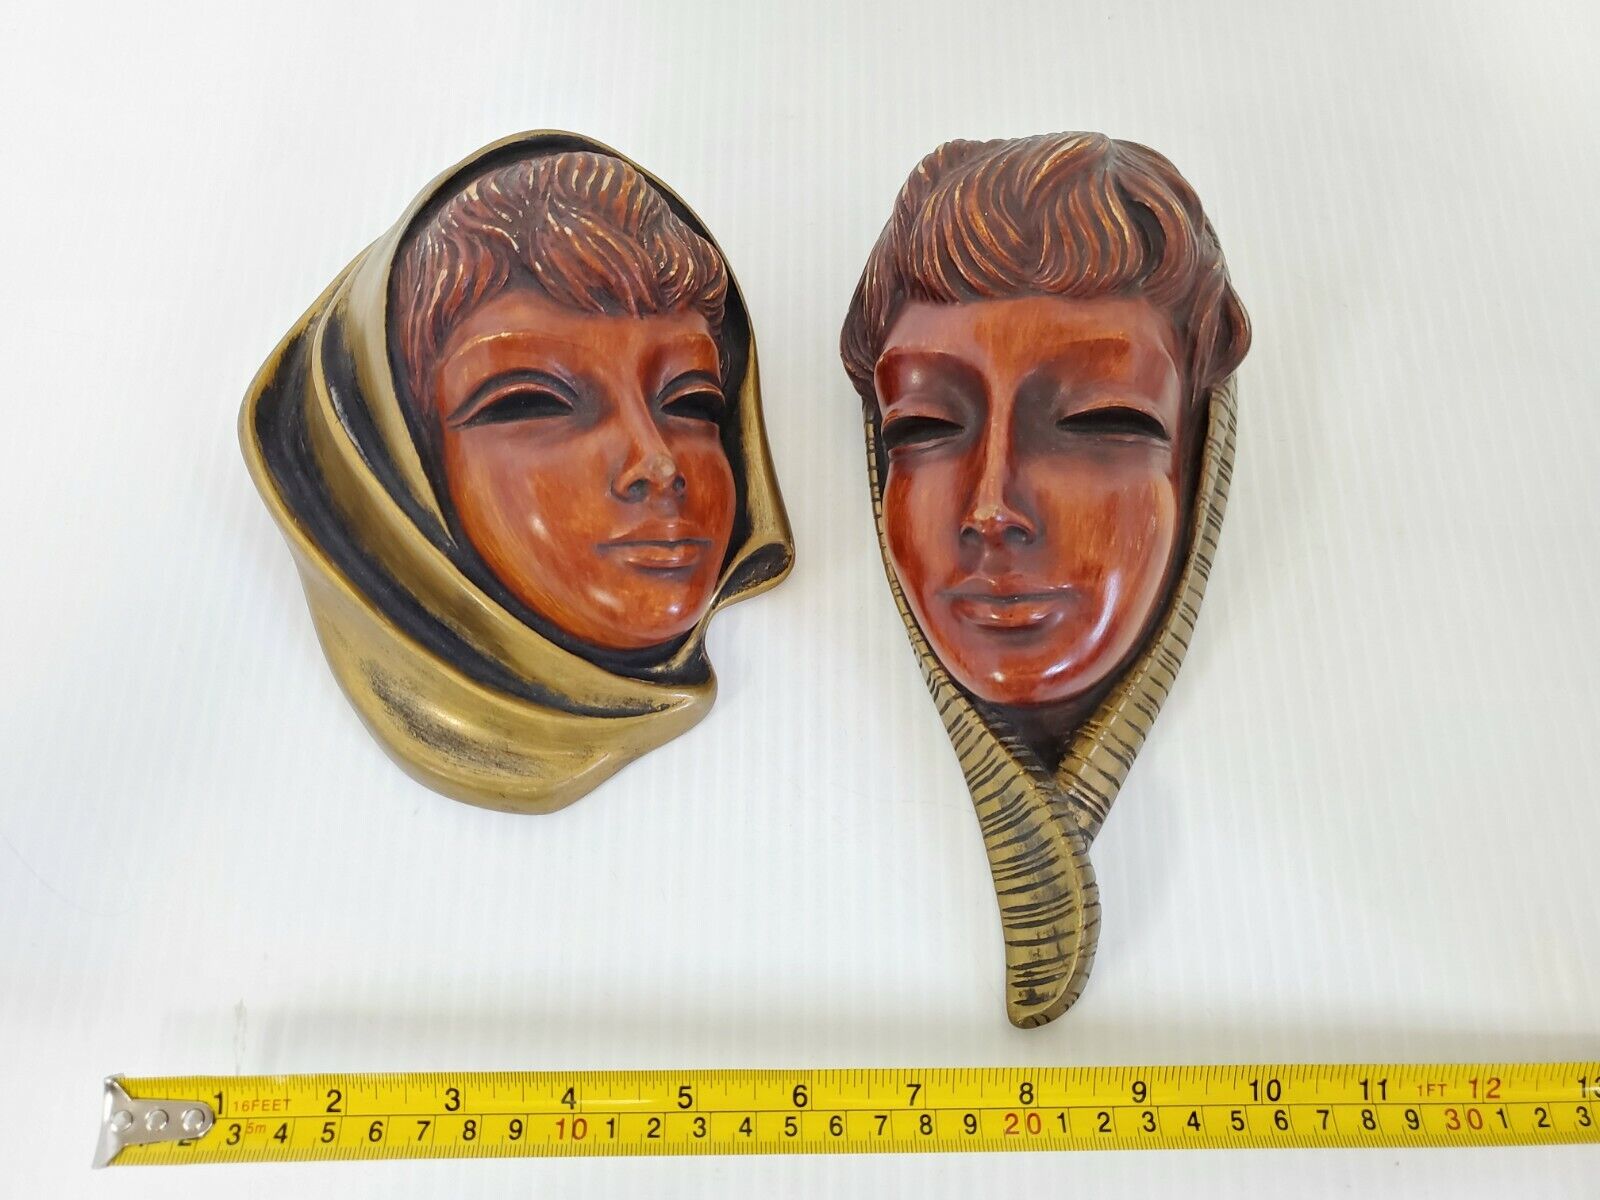 Lot of 2 Vintage Mid Century Woman Wall Plaque From Germany (Achatit brand) 